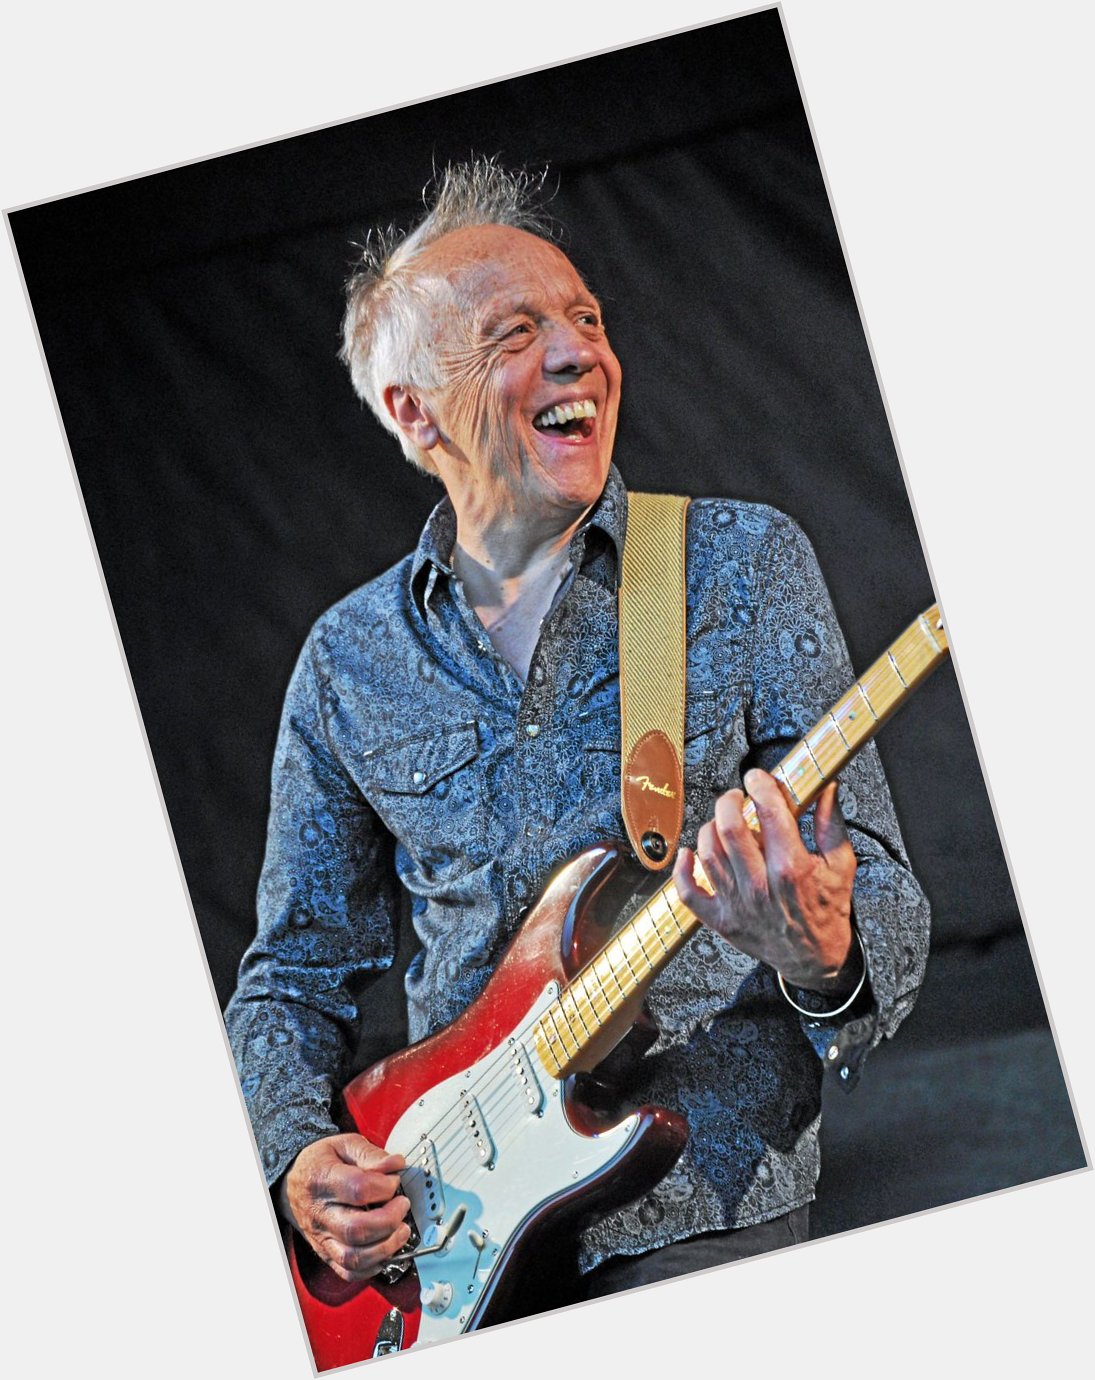 Please join me here at in wishing the one and only Robin Trower a very Happy 76th Birthday today  